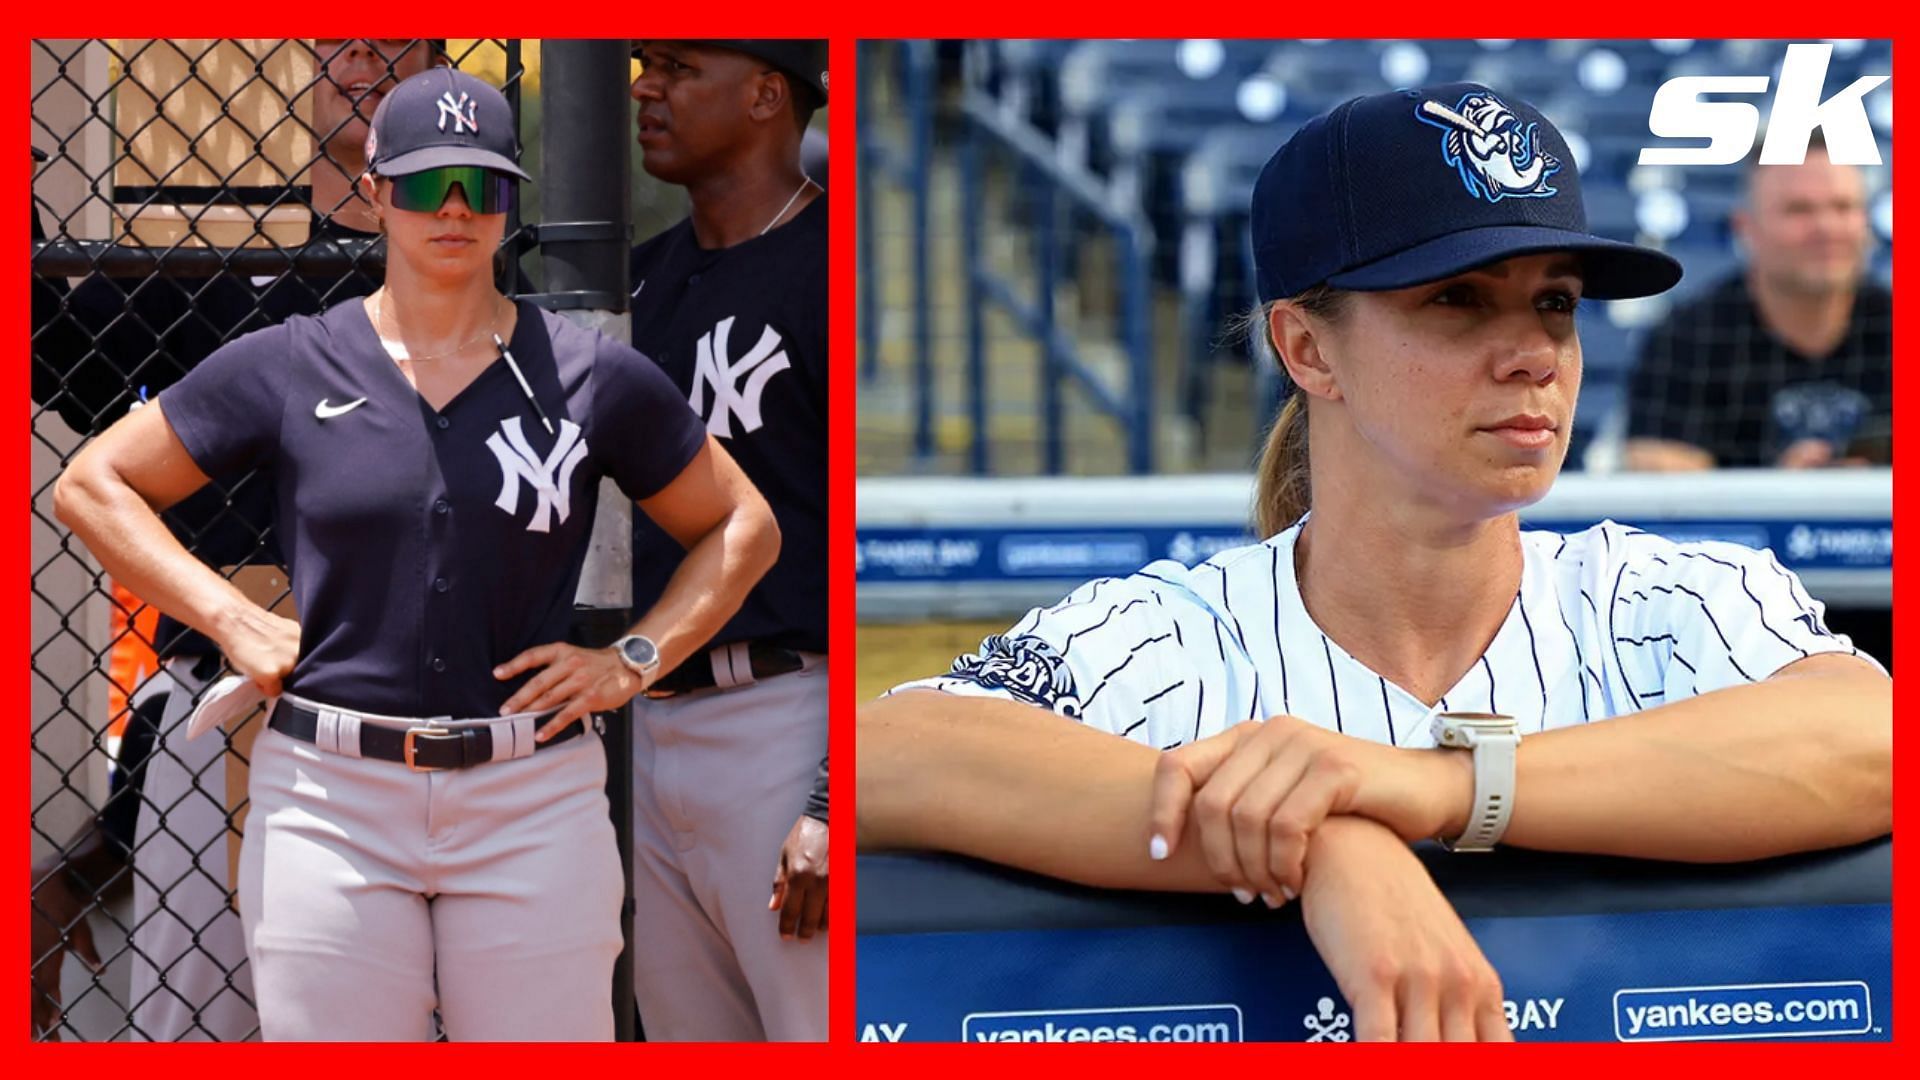 Rachel Balkovec to manage Yankees Low-A team